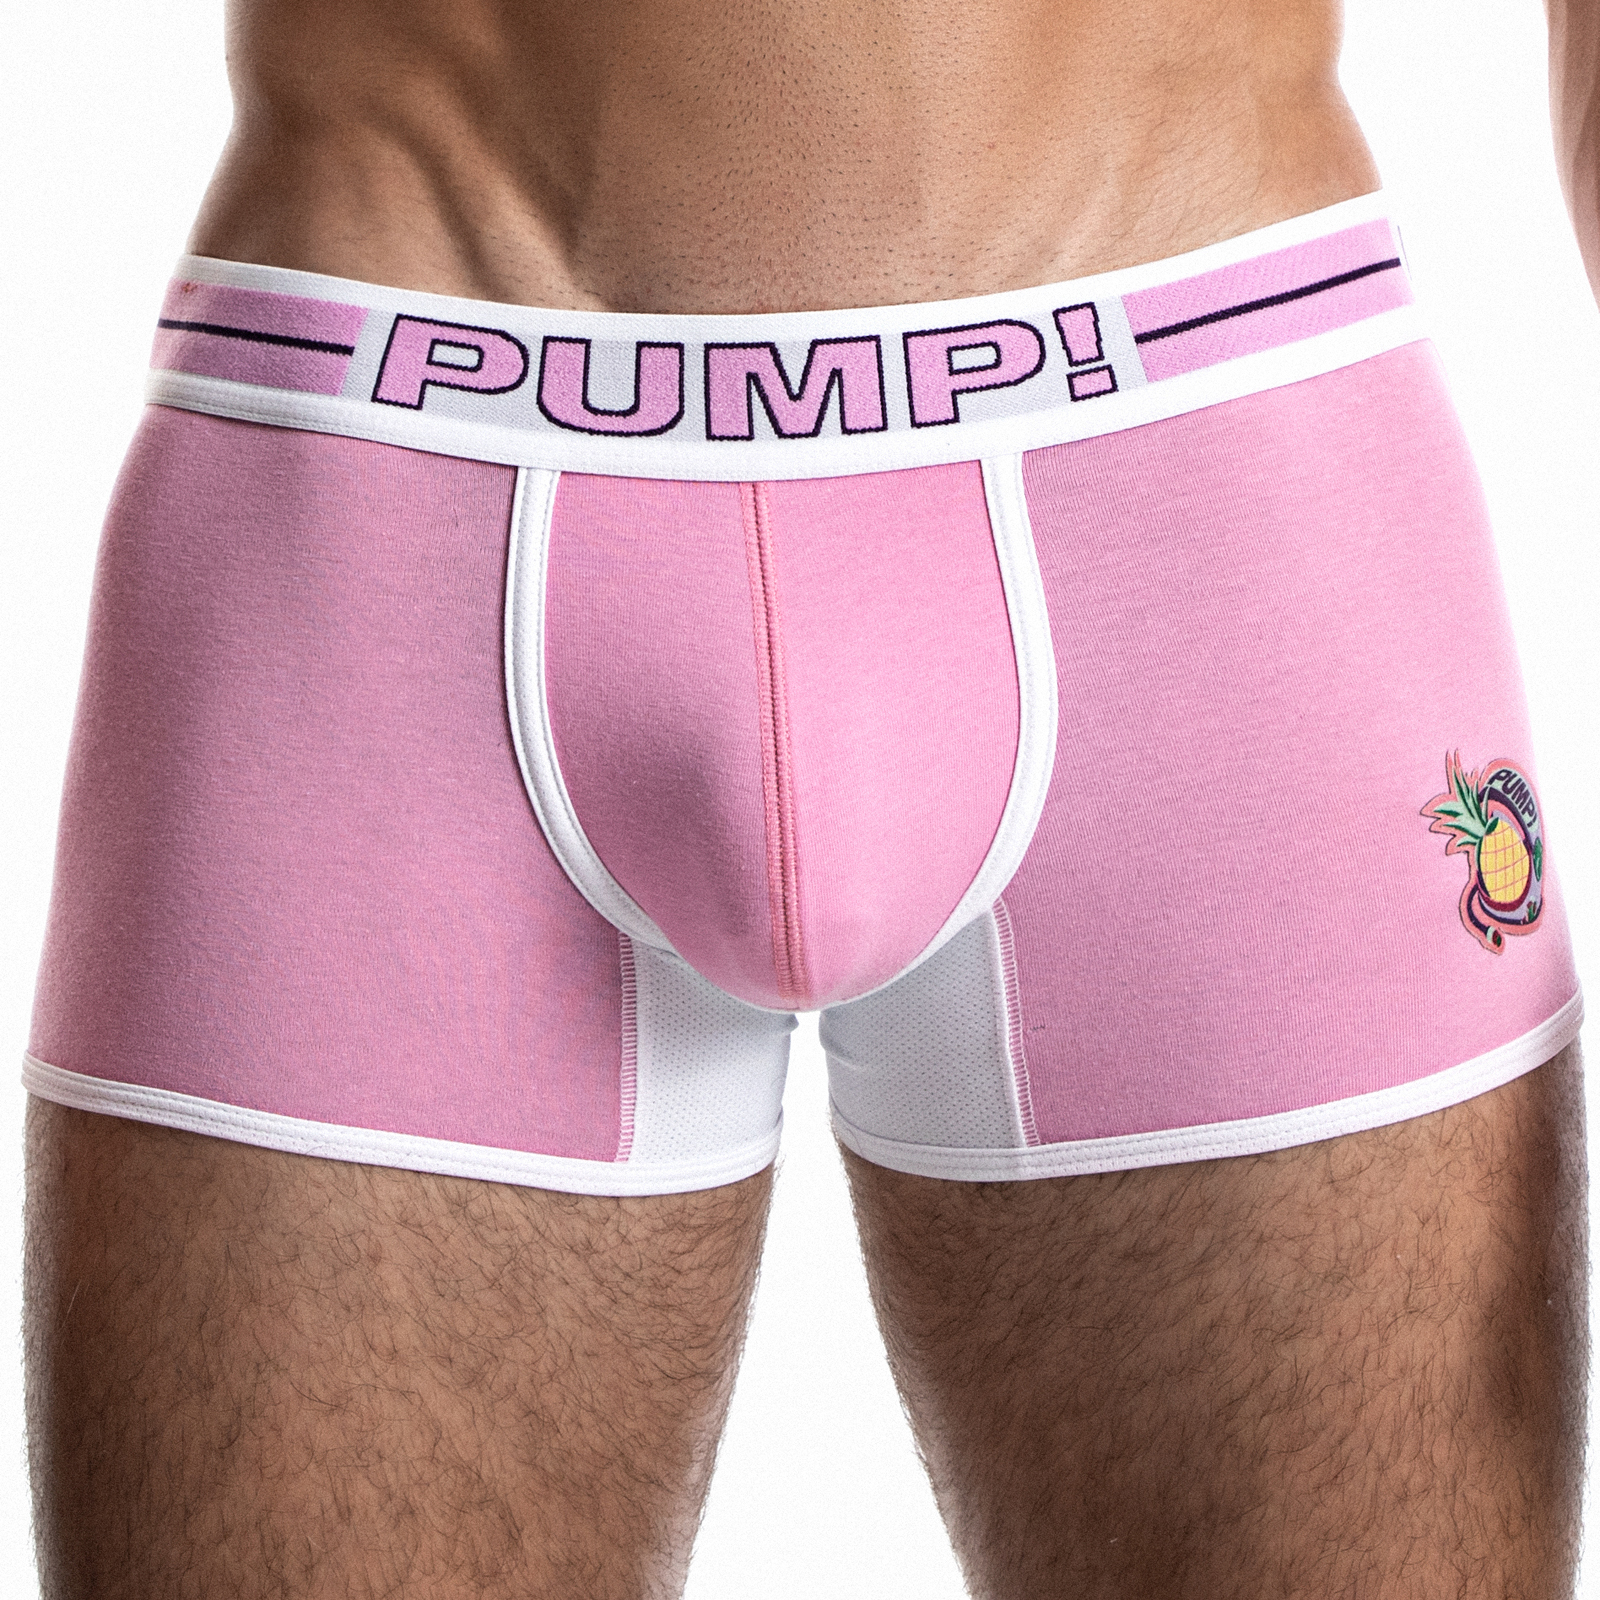 Boxer Pump! Space candy 11082